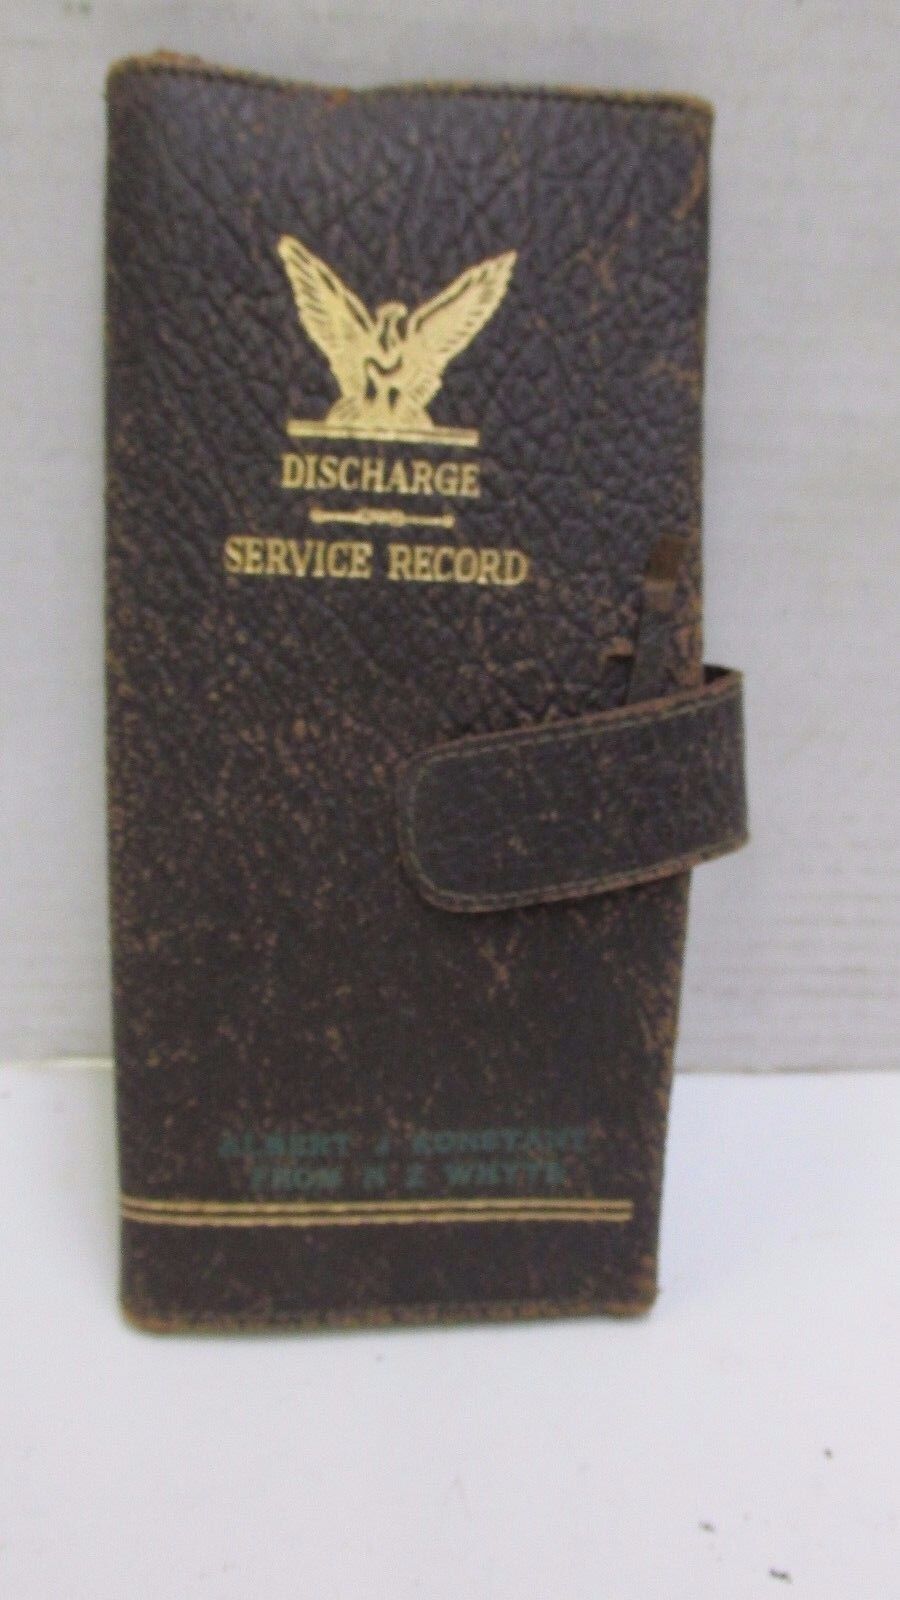 WW2 US Honorable Discharge Service Record Certificate Leather Folder Case Named 